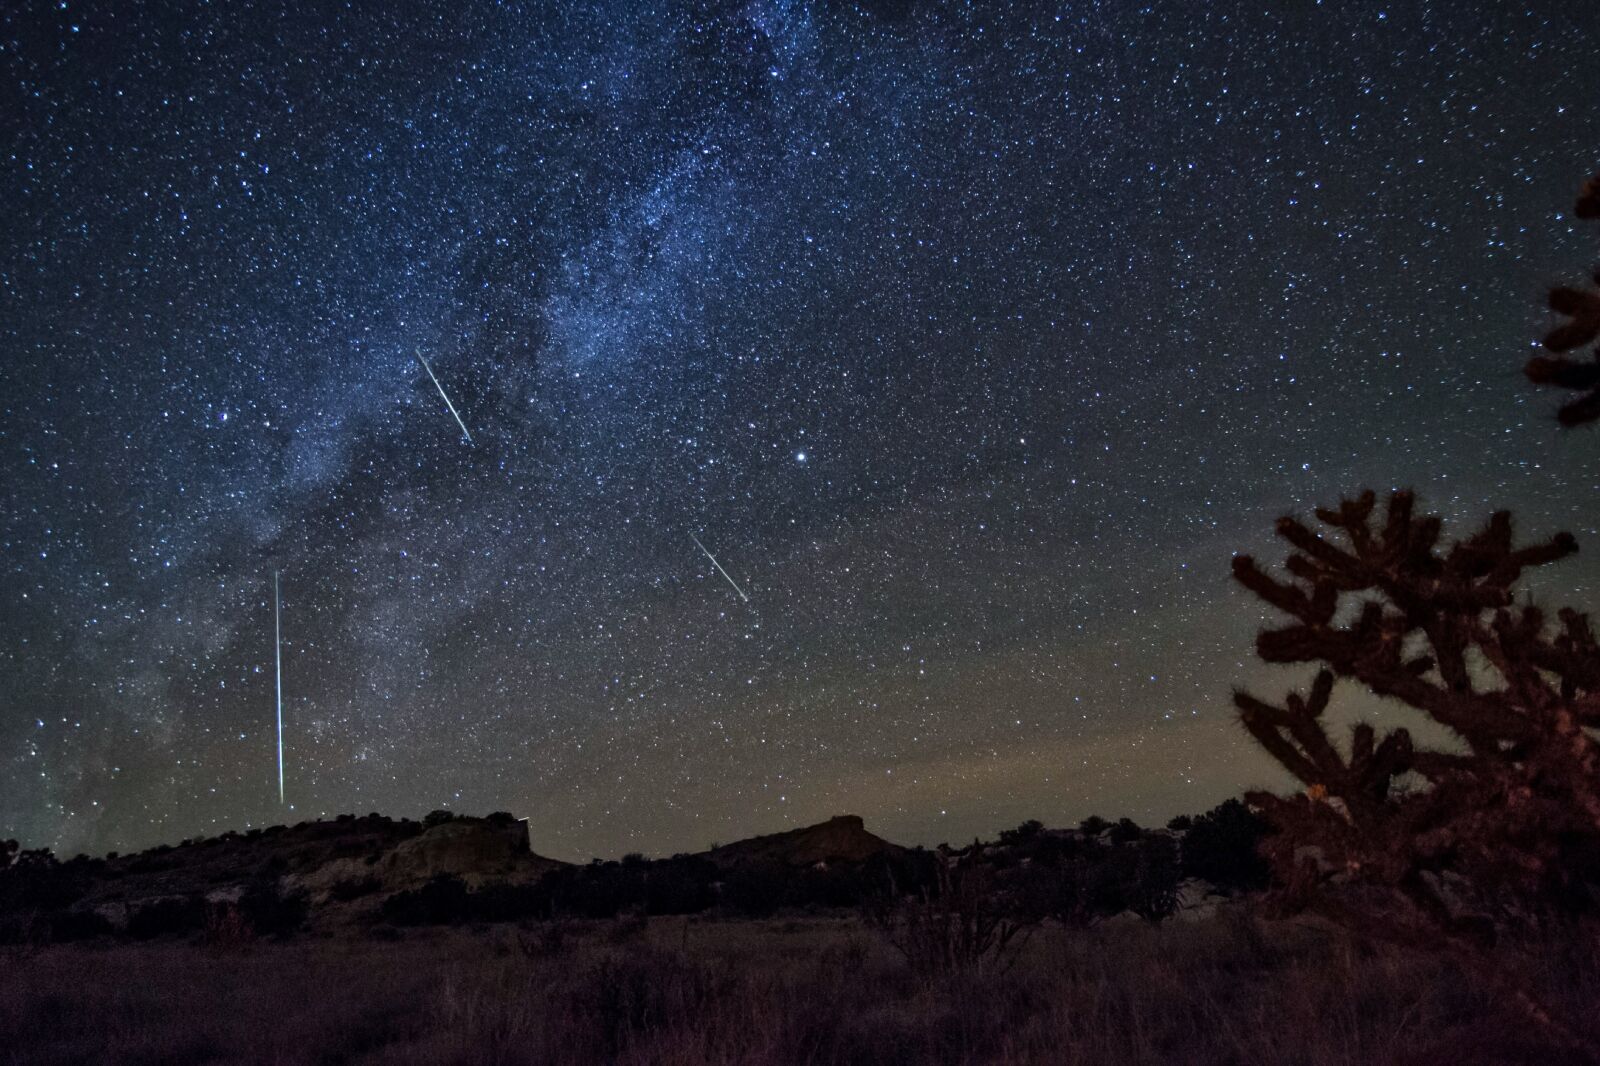 Orionids Meteor Shower one of the top astronomy calendar events in October